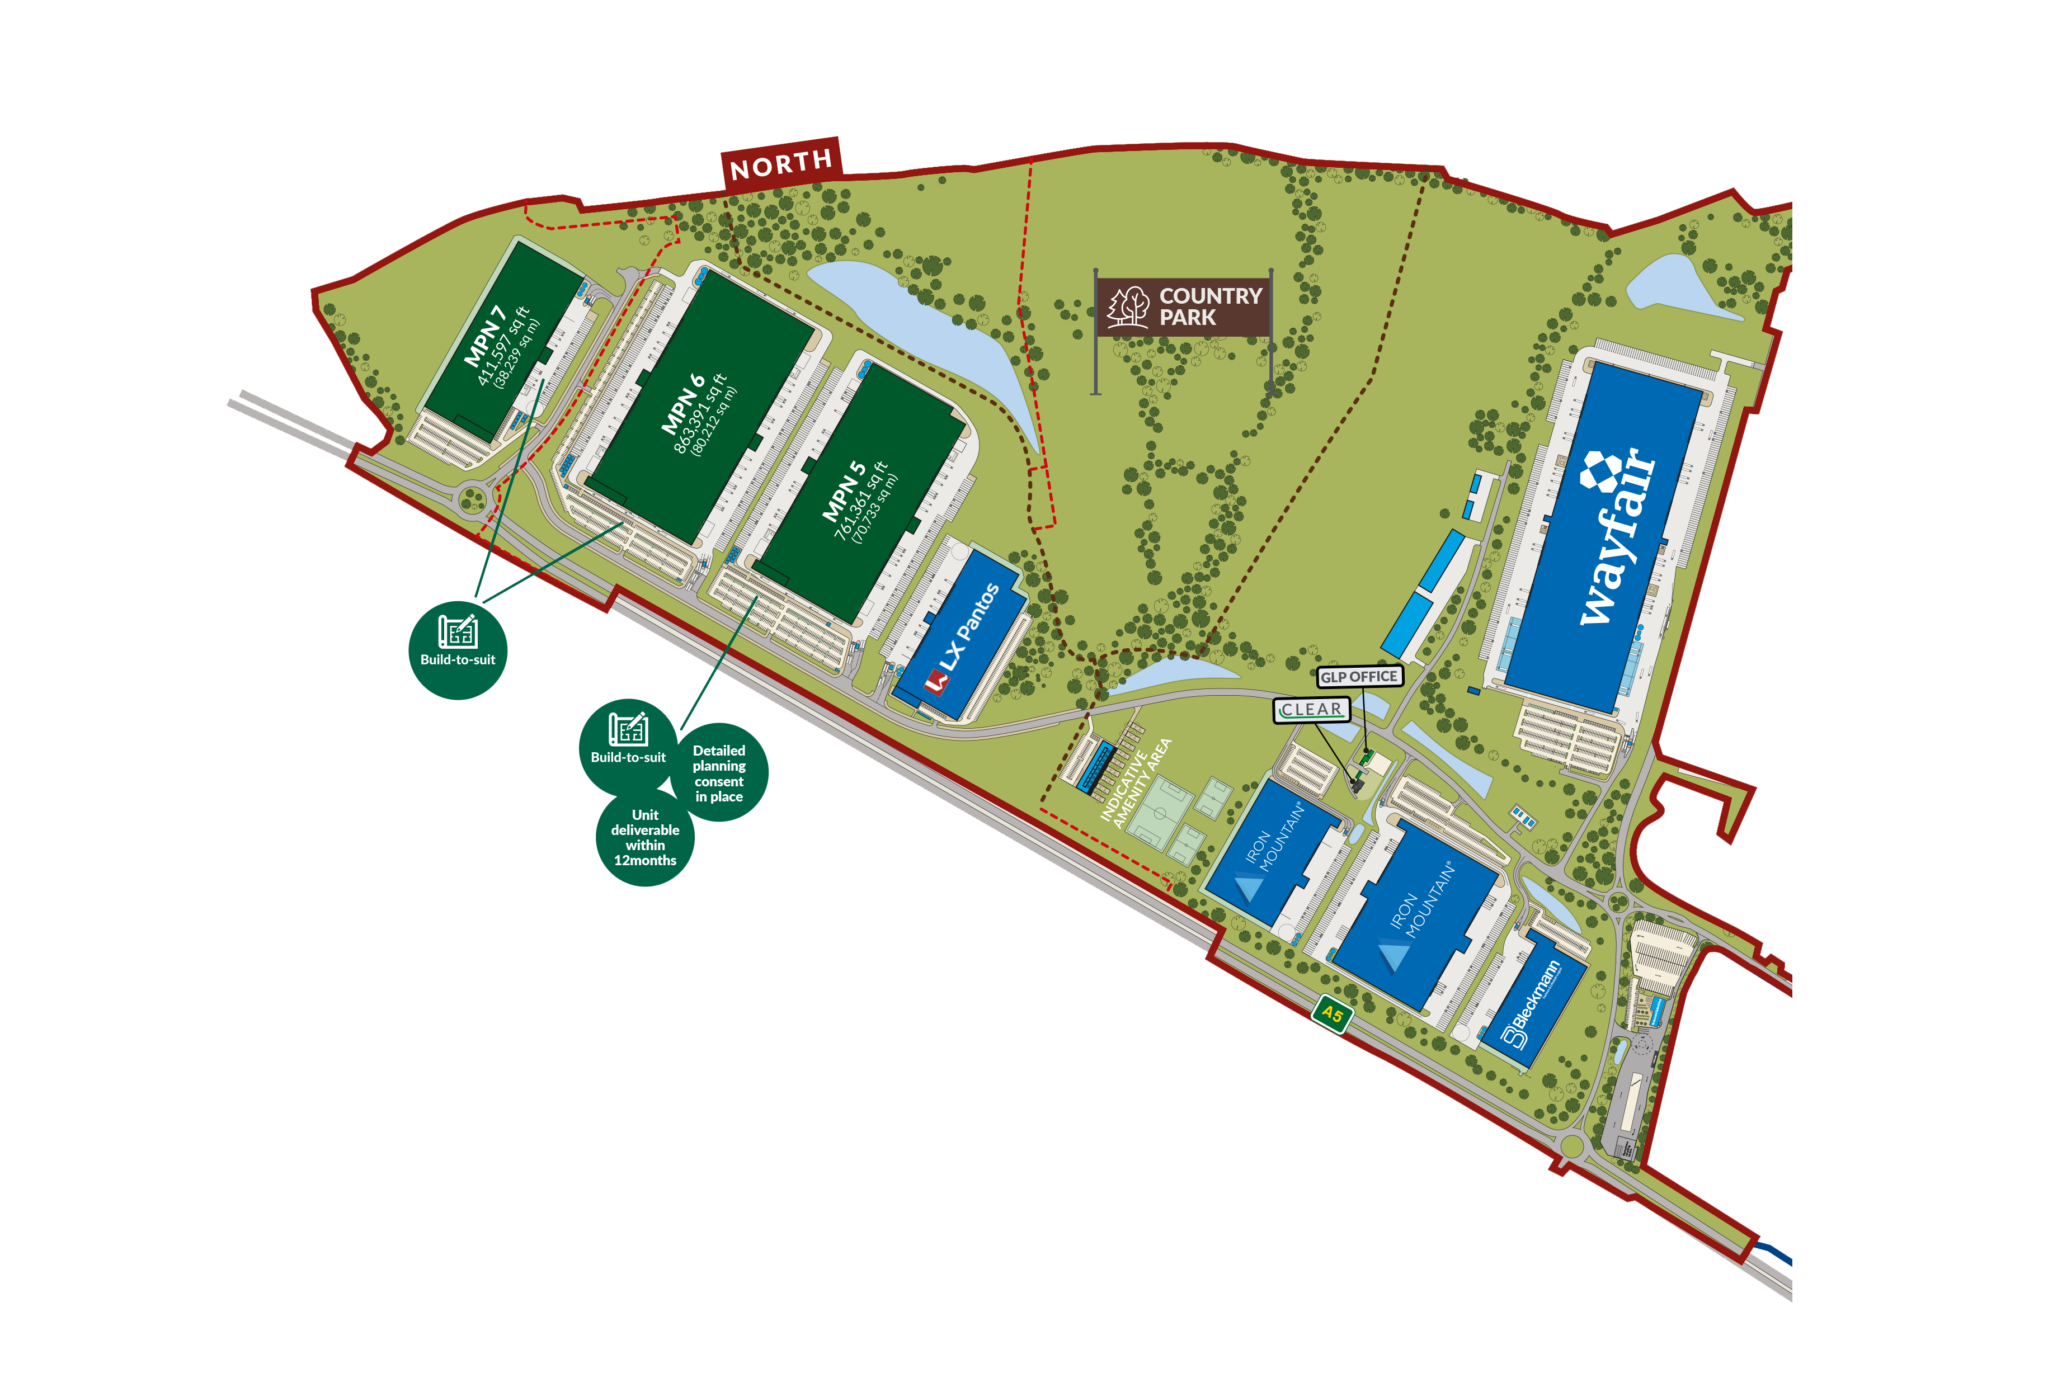 Site plan of Magna Park Lutterworth, with warehouses surrounded by land.